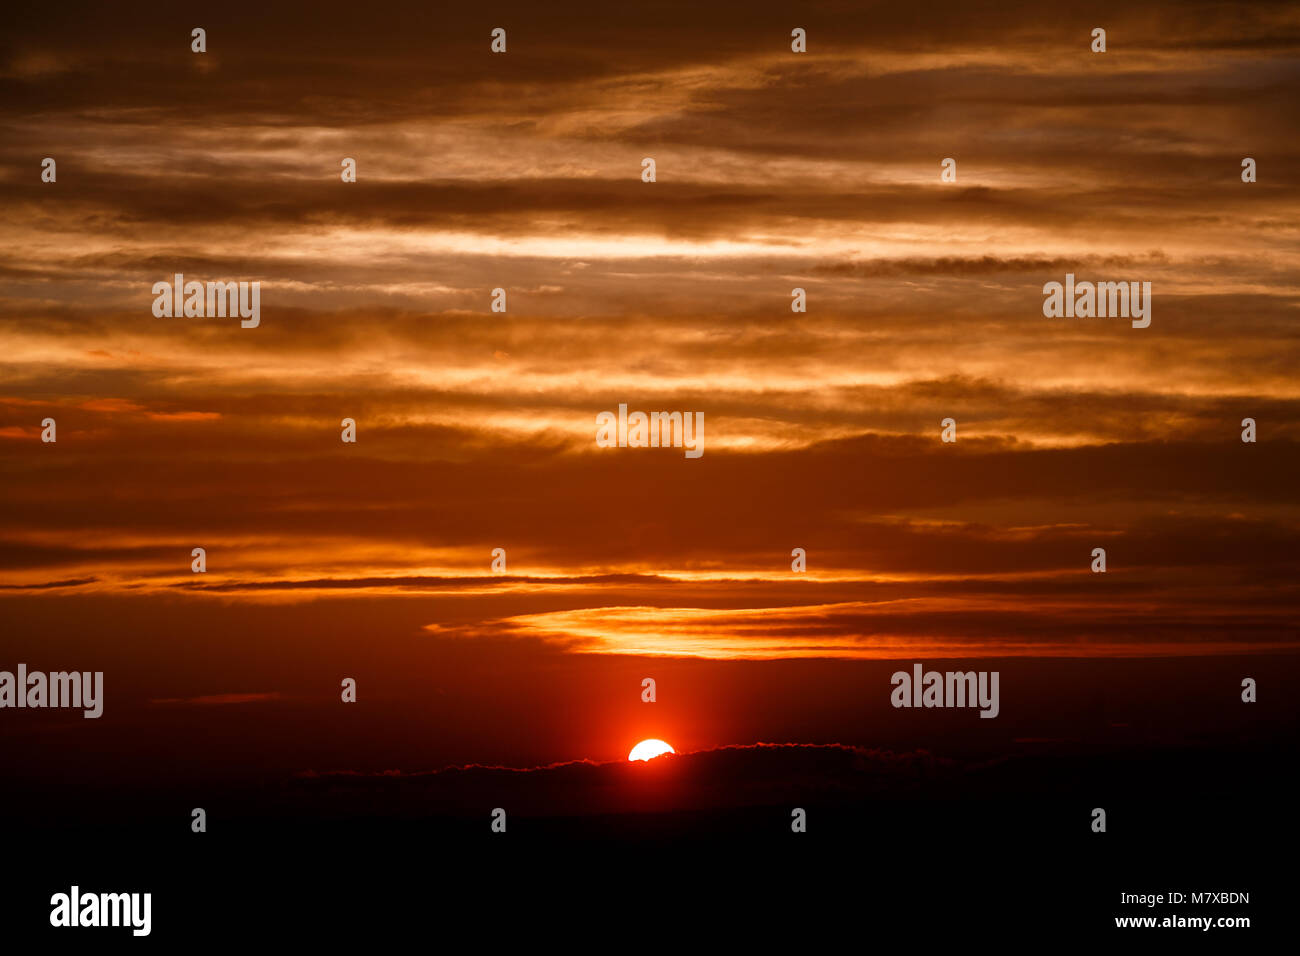 amazing sunset wallpaper. beautiful red sunset and clouds in orange sky, dramatic view. fascinating image. beautiful nature moments, breathtaking scen Stock Photo